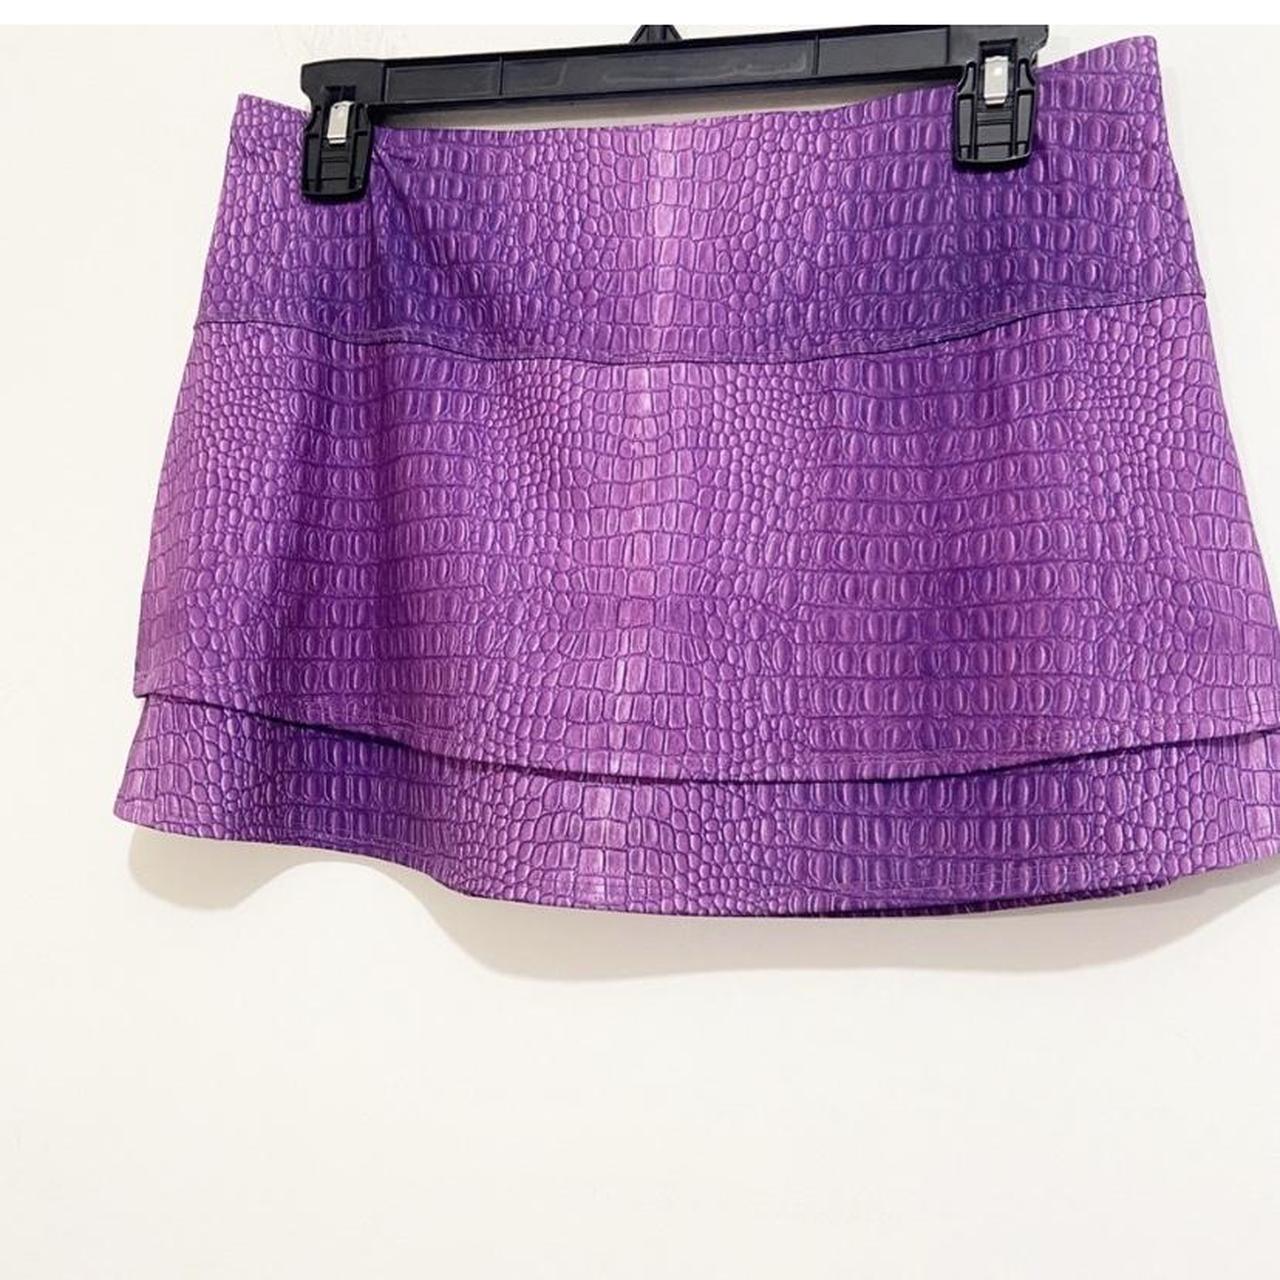 Product Image 2 - Lucy Love Purple Skort. In